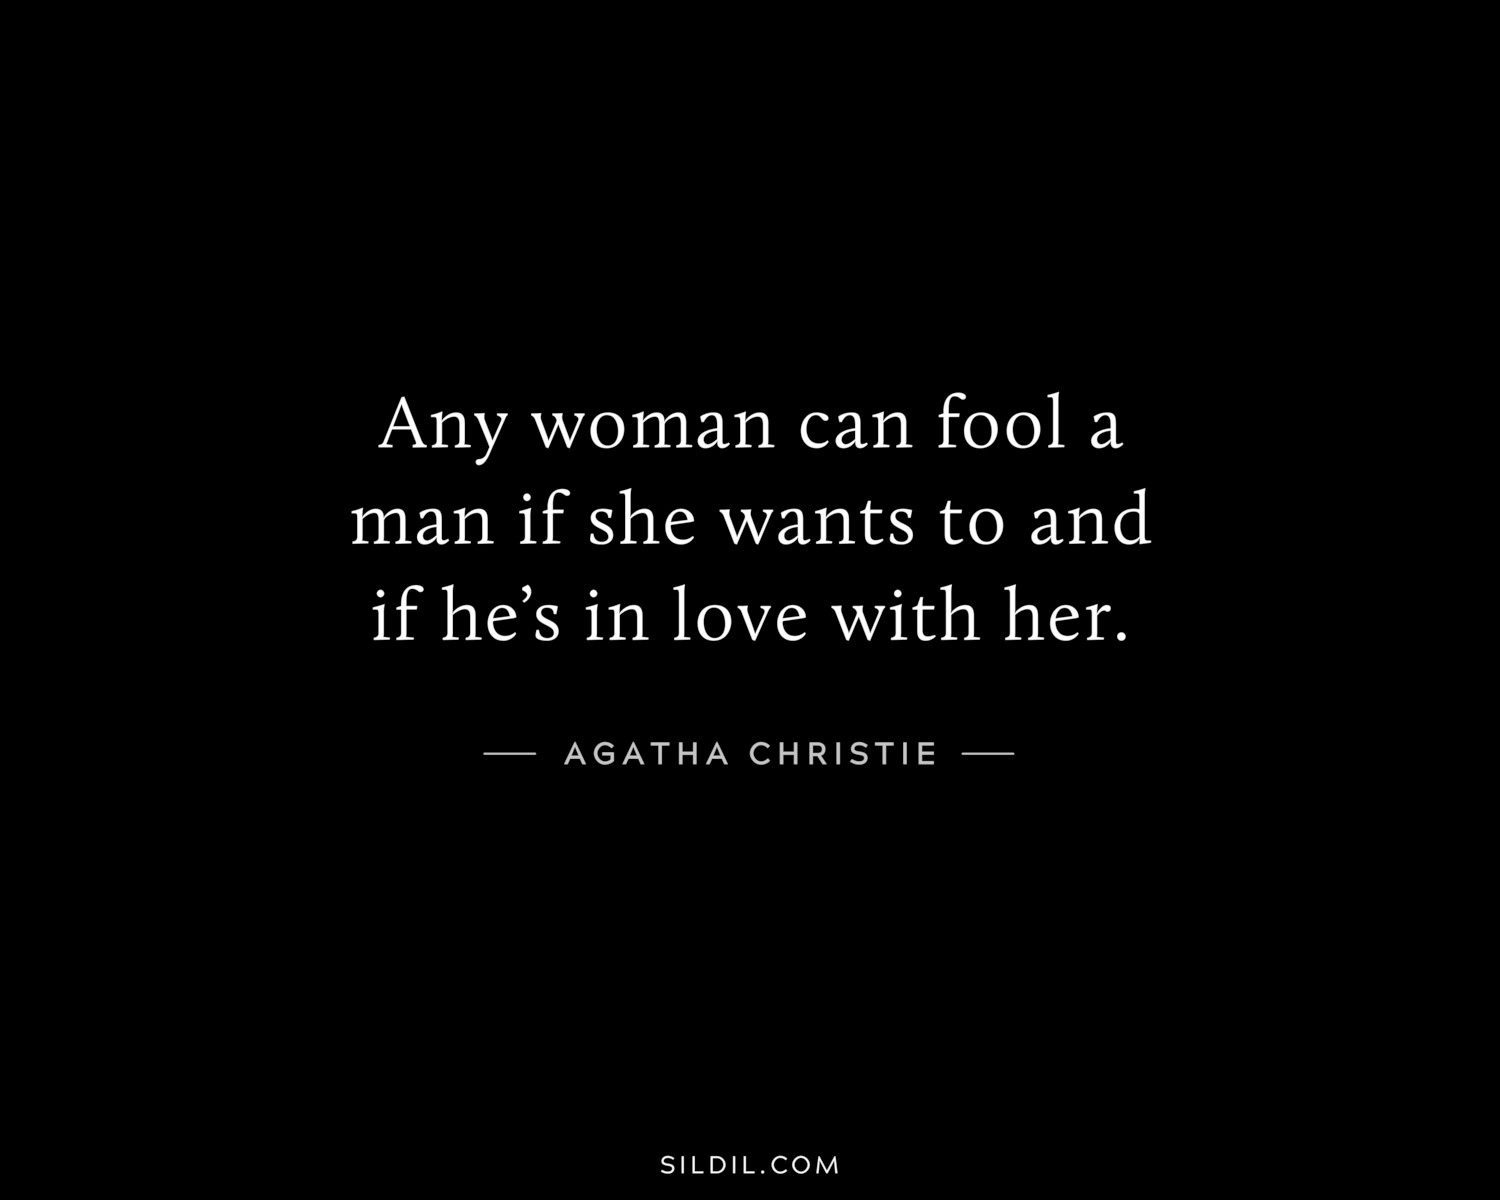 Any woman can fool a man if she wants to and if he’s in love with her.